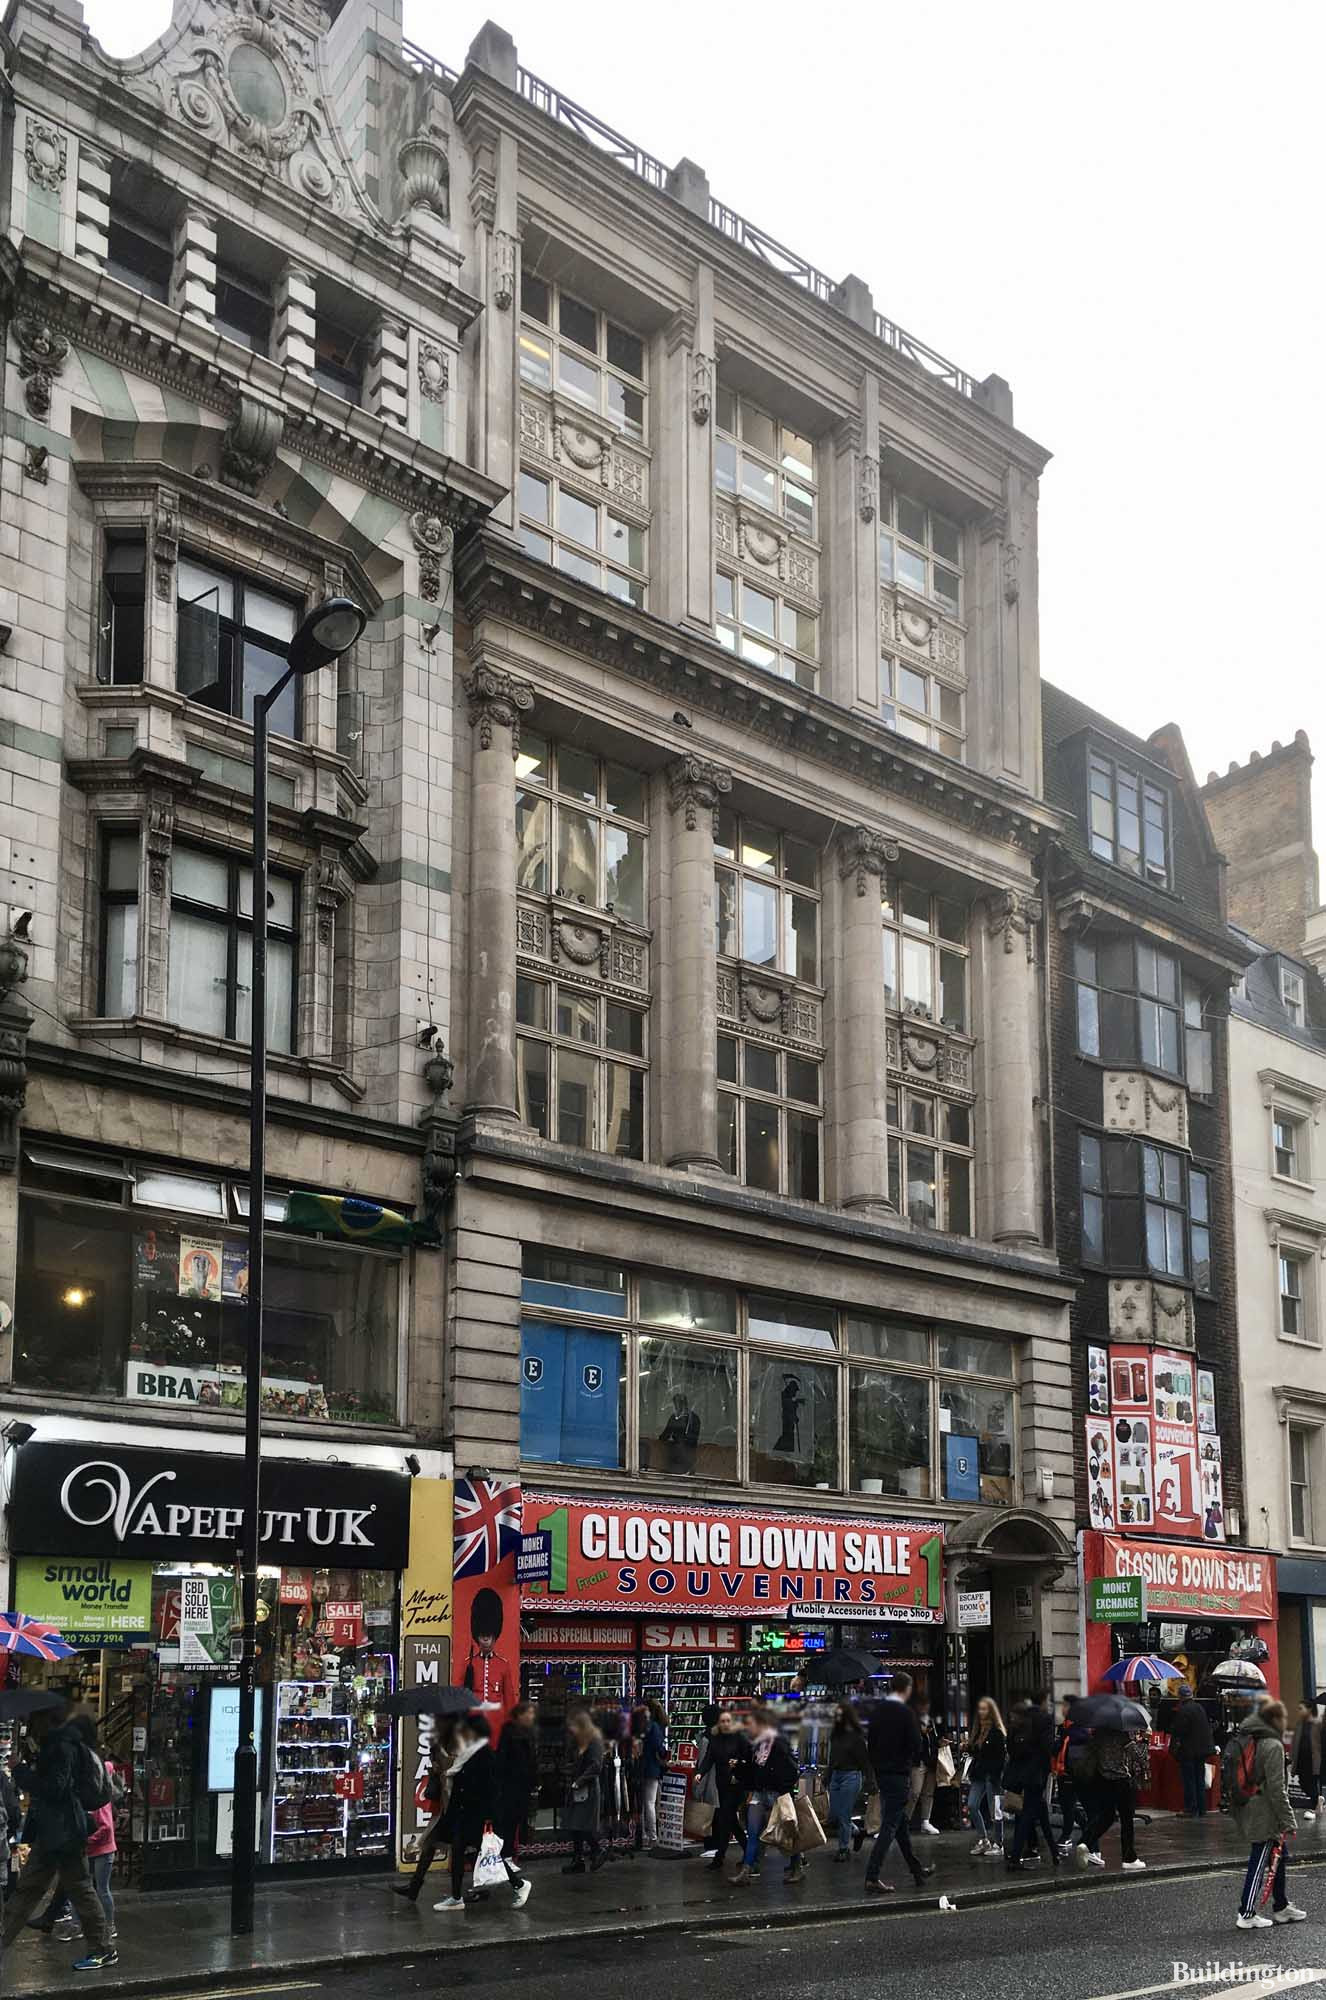 Closing down sale at 37-39 Oxford Street building in Soho, London W1.